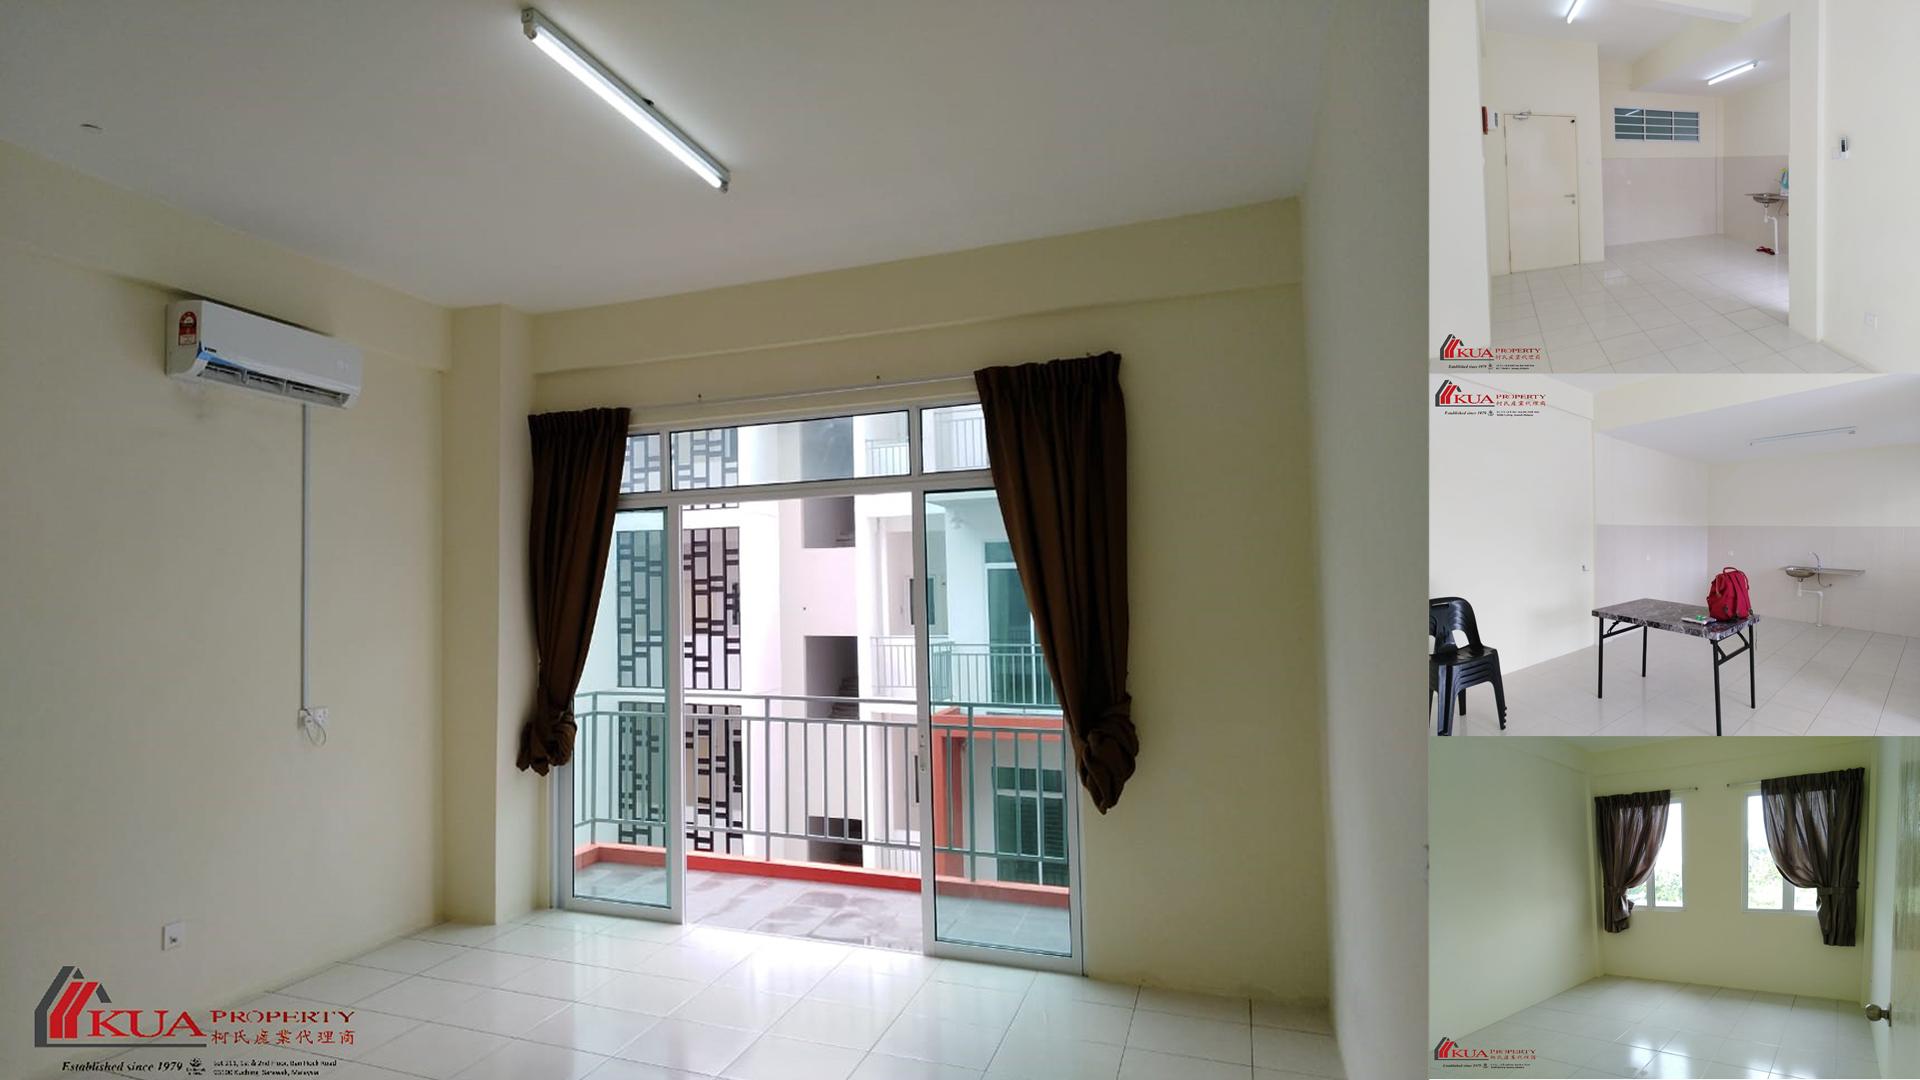 Stutong Heights Apartment 2 FOR SALE! Located at Stutong